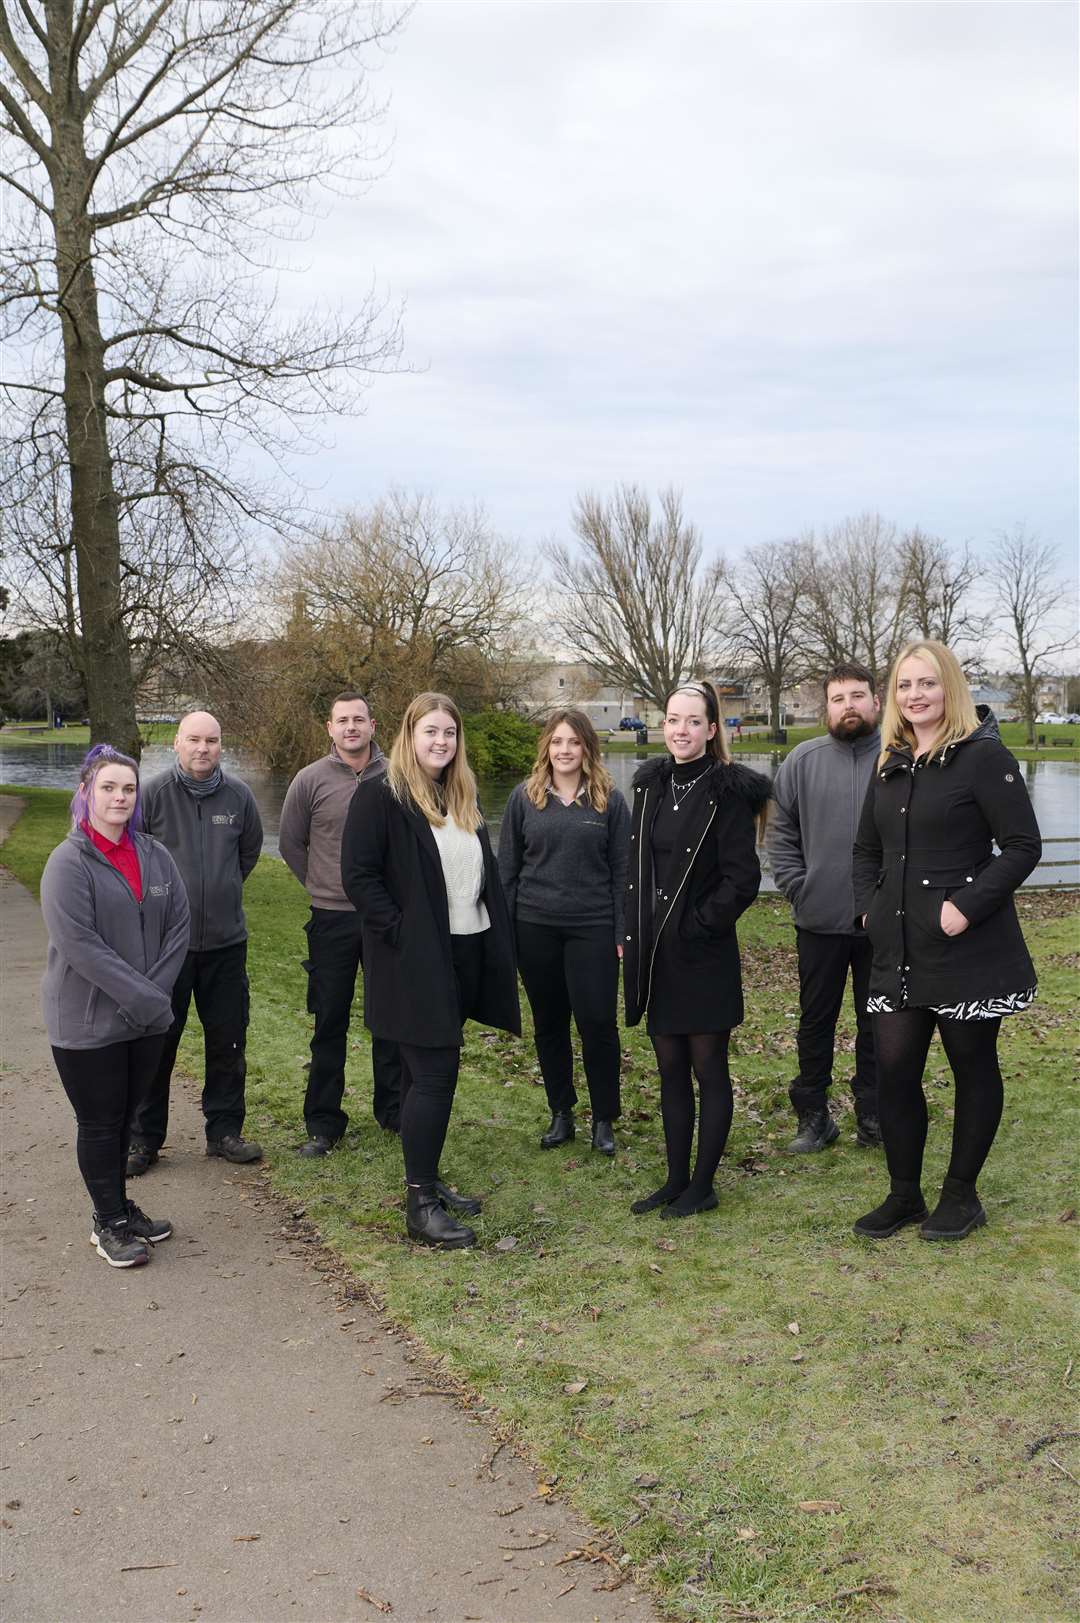 Gordon & MacPhail Young Persons Guarantee Employer. LtoR Aimee Johnston, Donnie Geddes, Martin Forsyth, Libby Hunt, Kaylie Mcrae, Maya McNeil, Christopher Allan and Jodie Clayton.